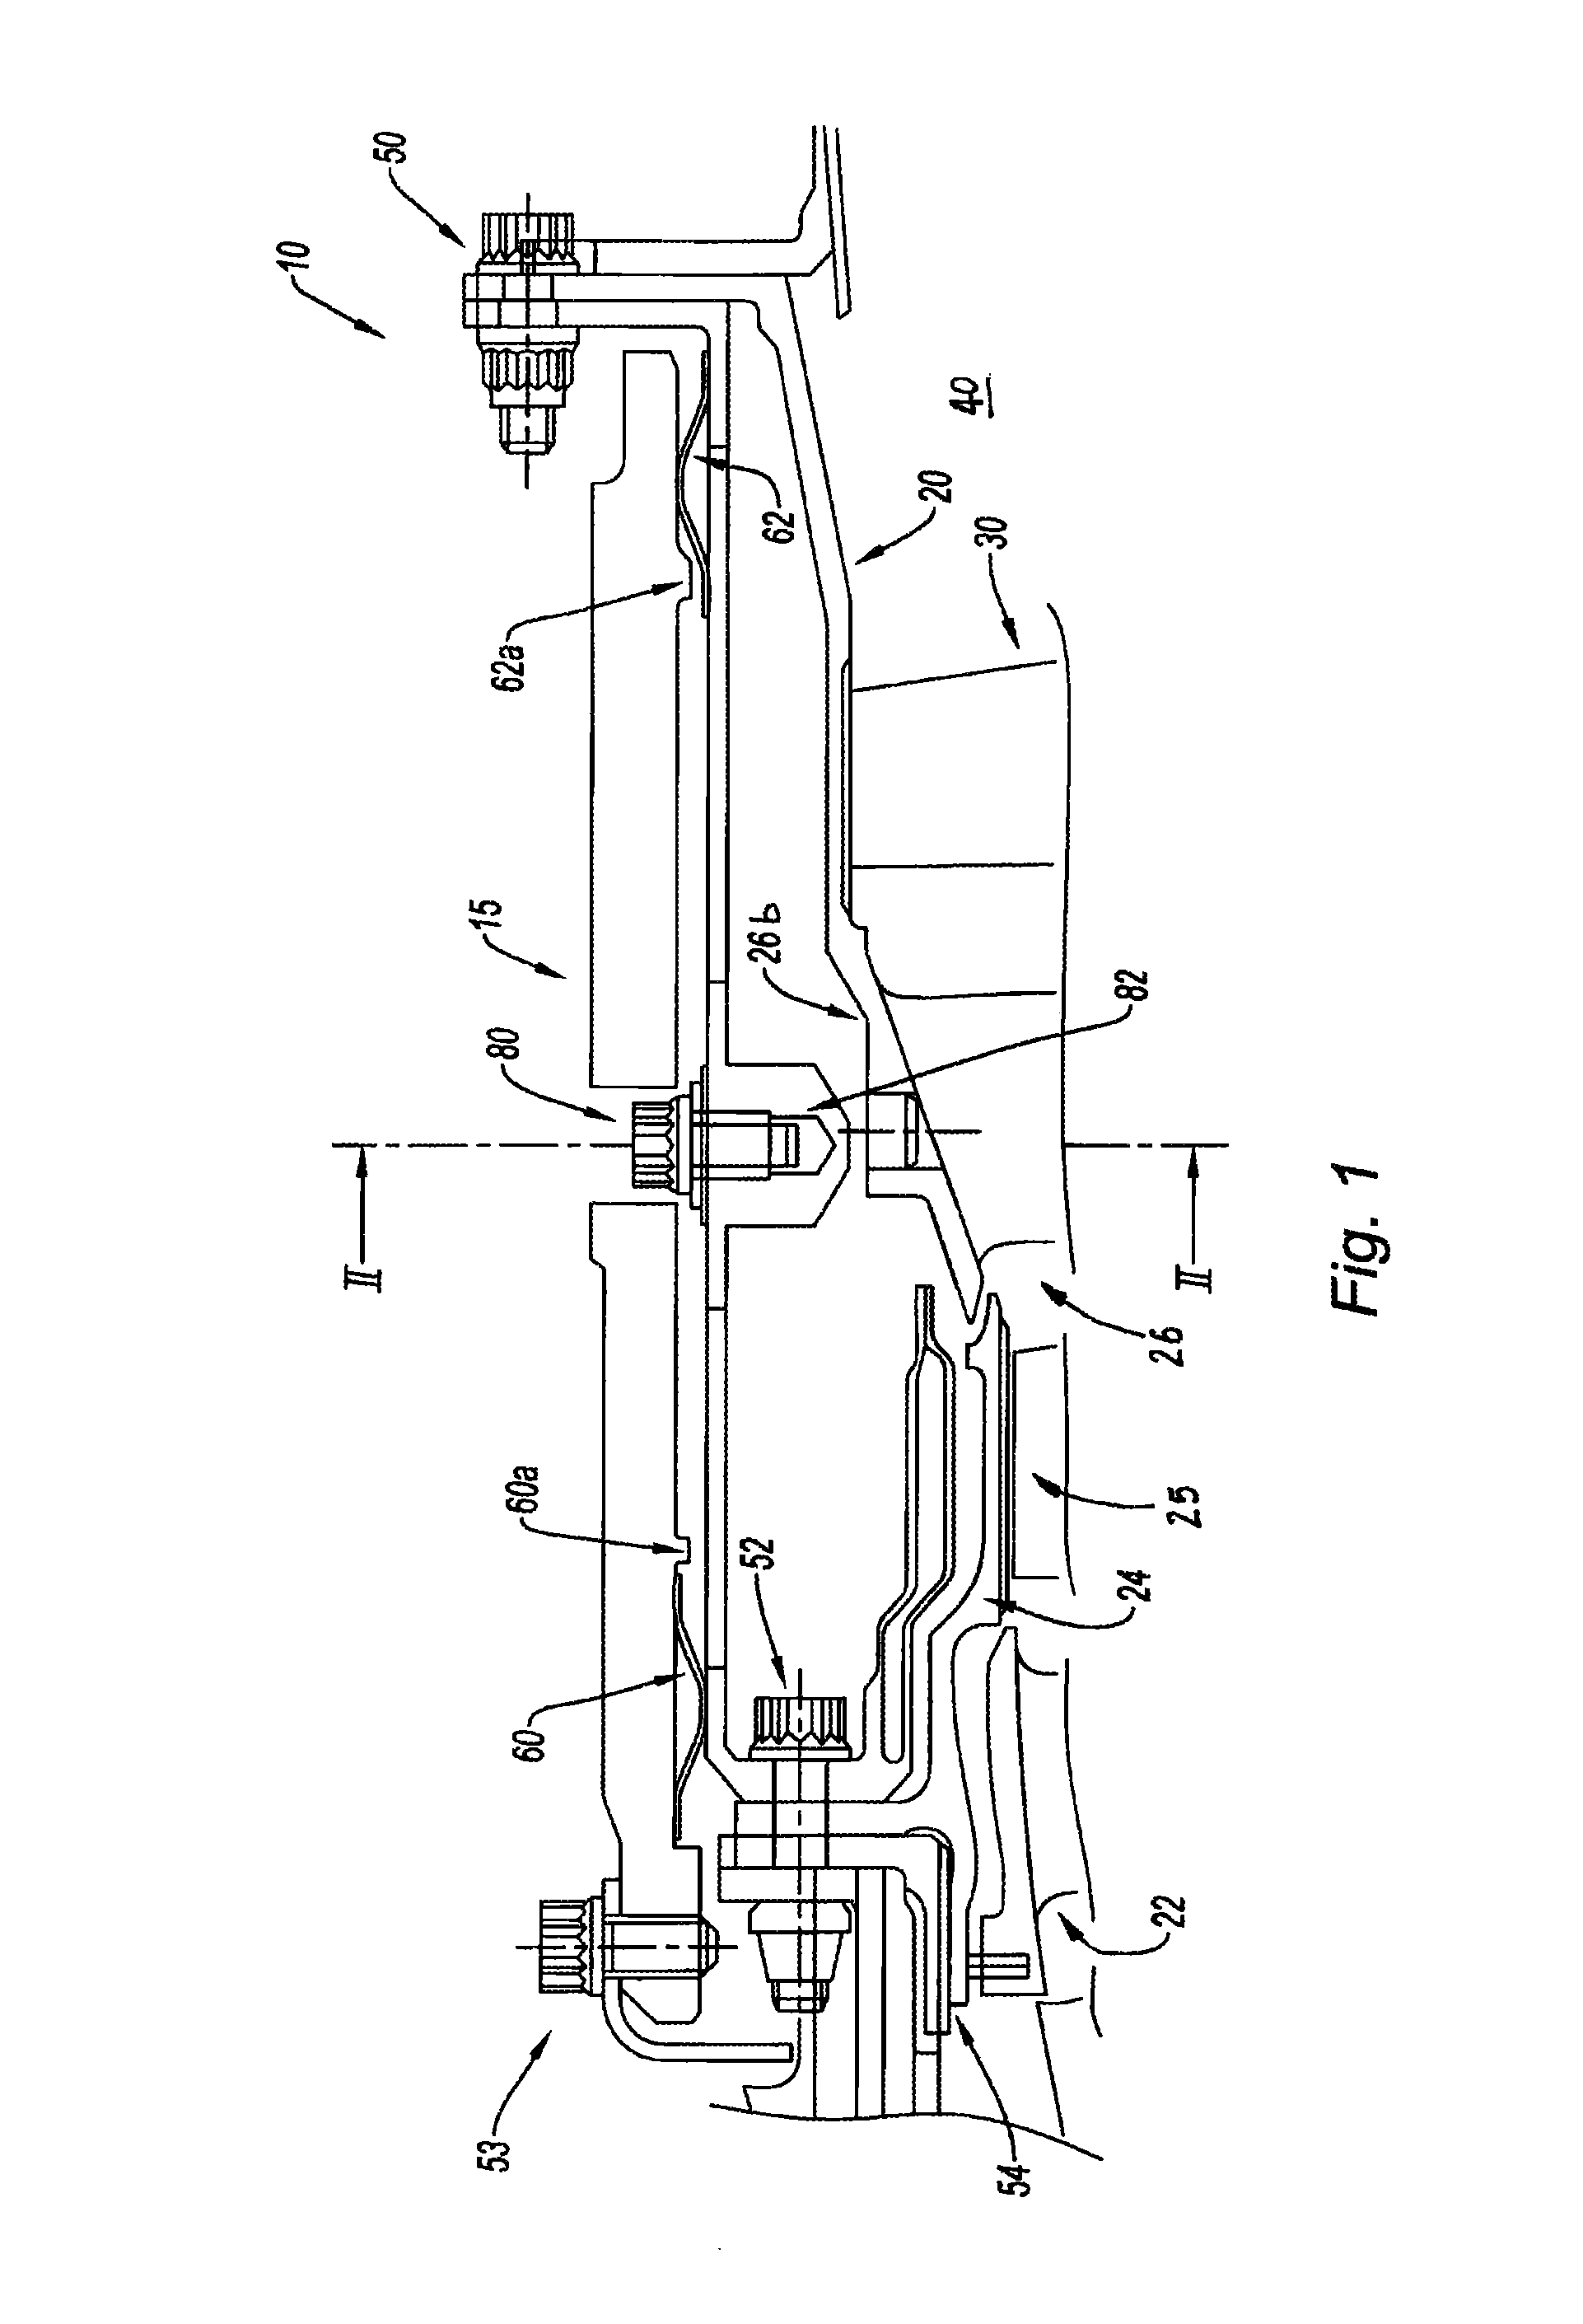 Method for mounting shielding on a turbine casing, and mounting assembly for implementing same